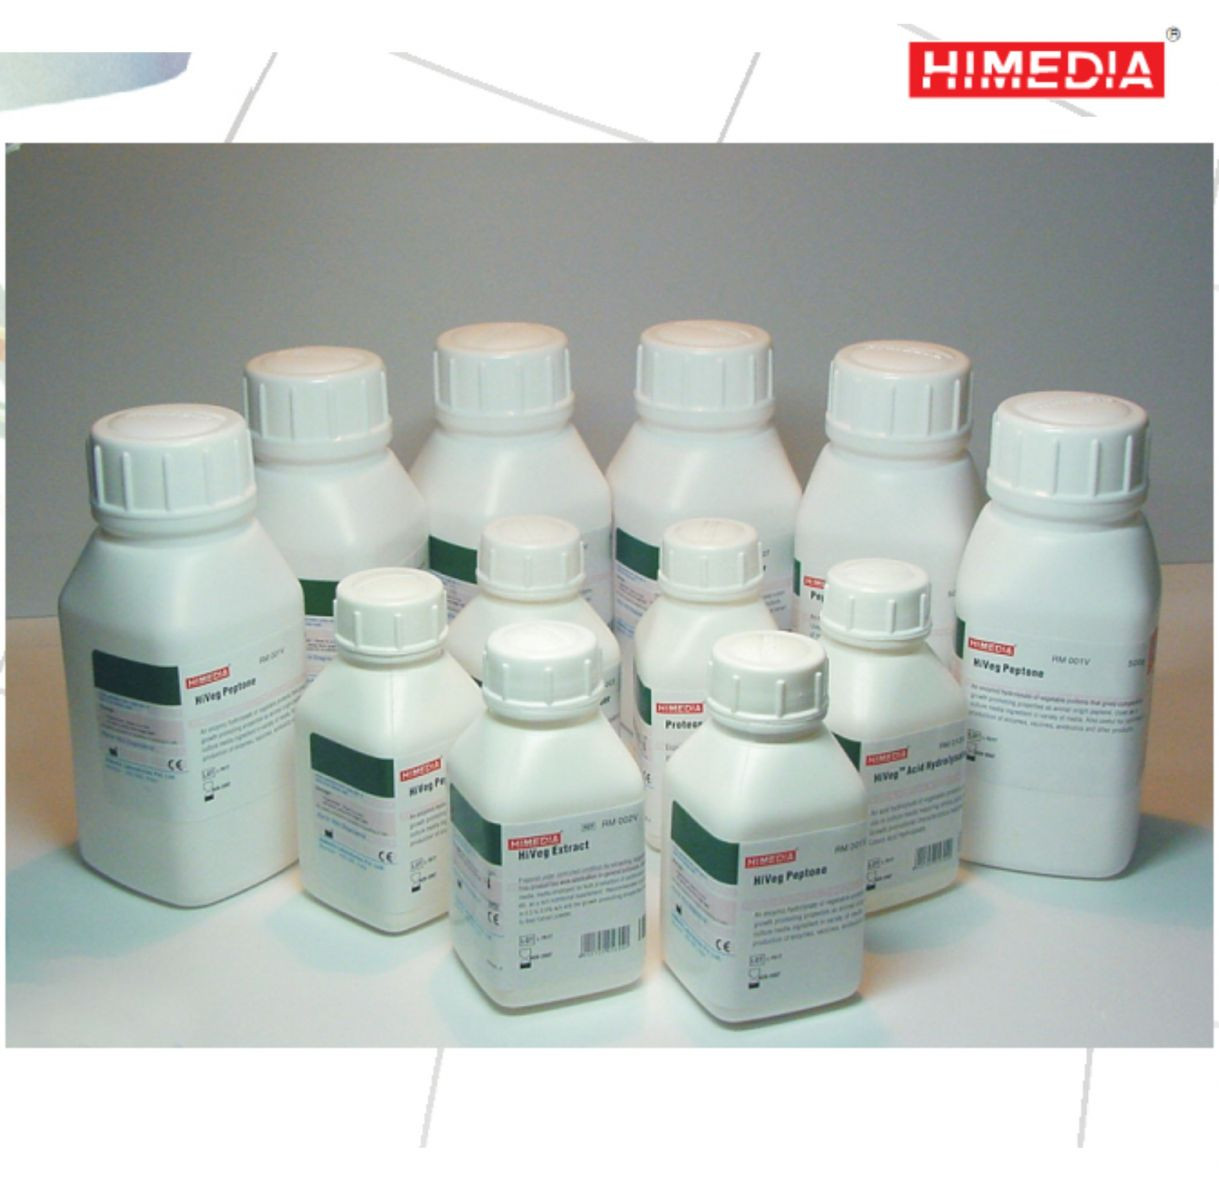  Supplement,Granulated 500g Himedia